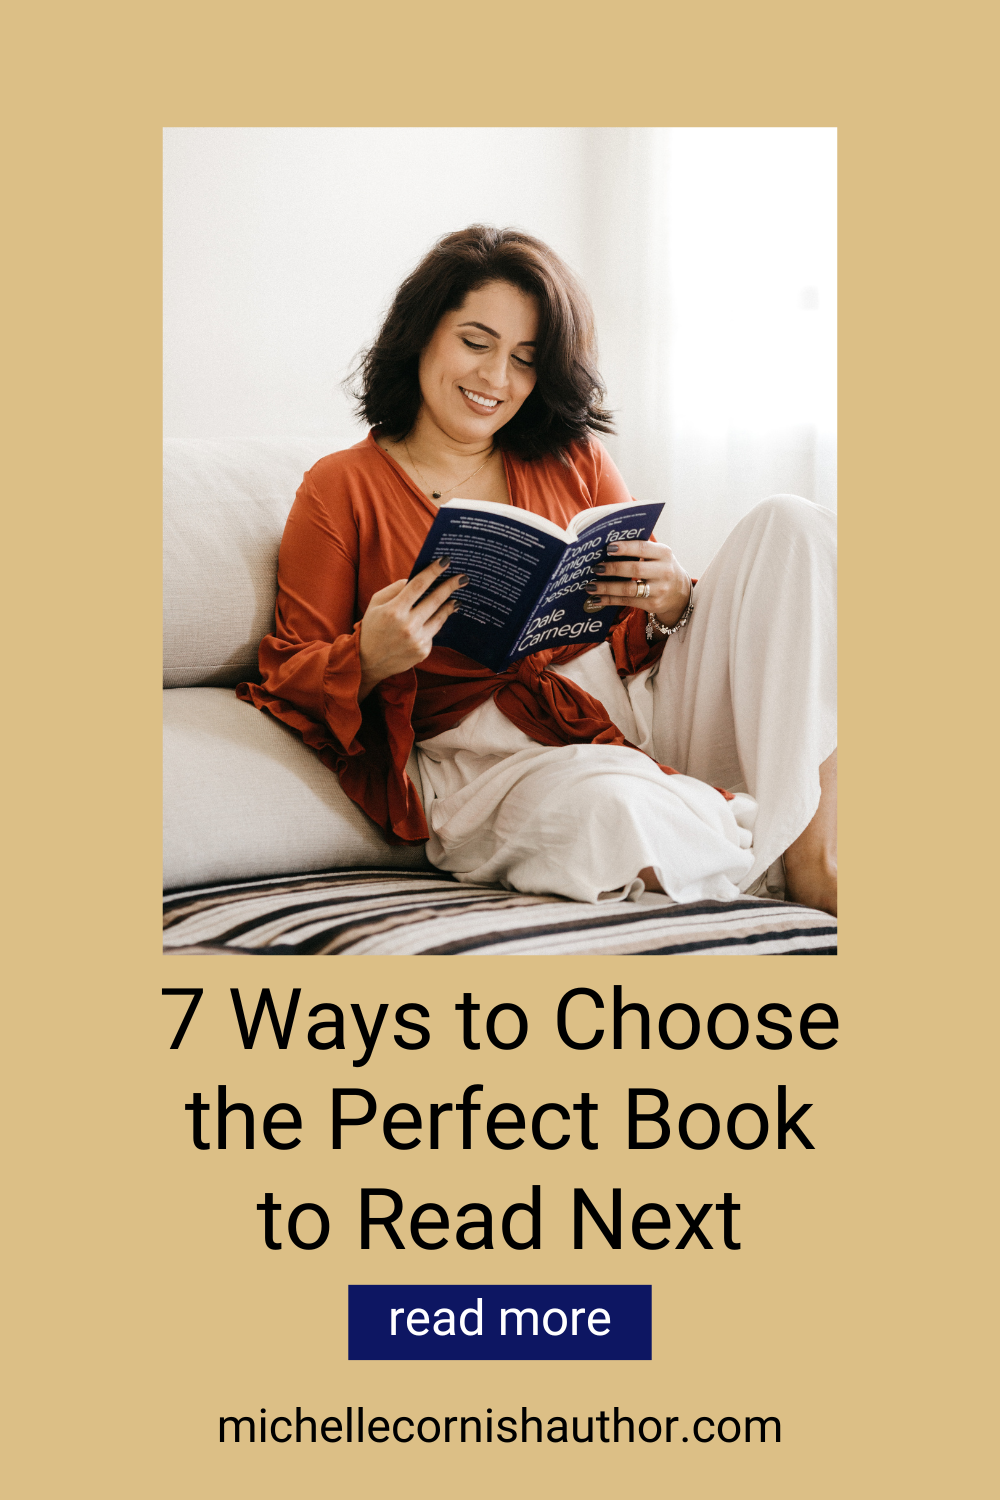 7 Ways to Choose the Perfect Book to Read Next